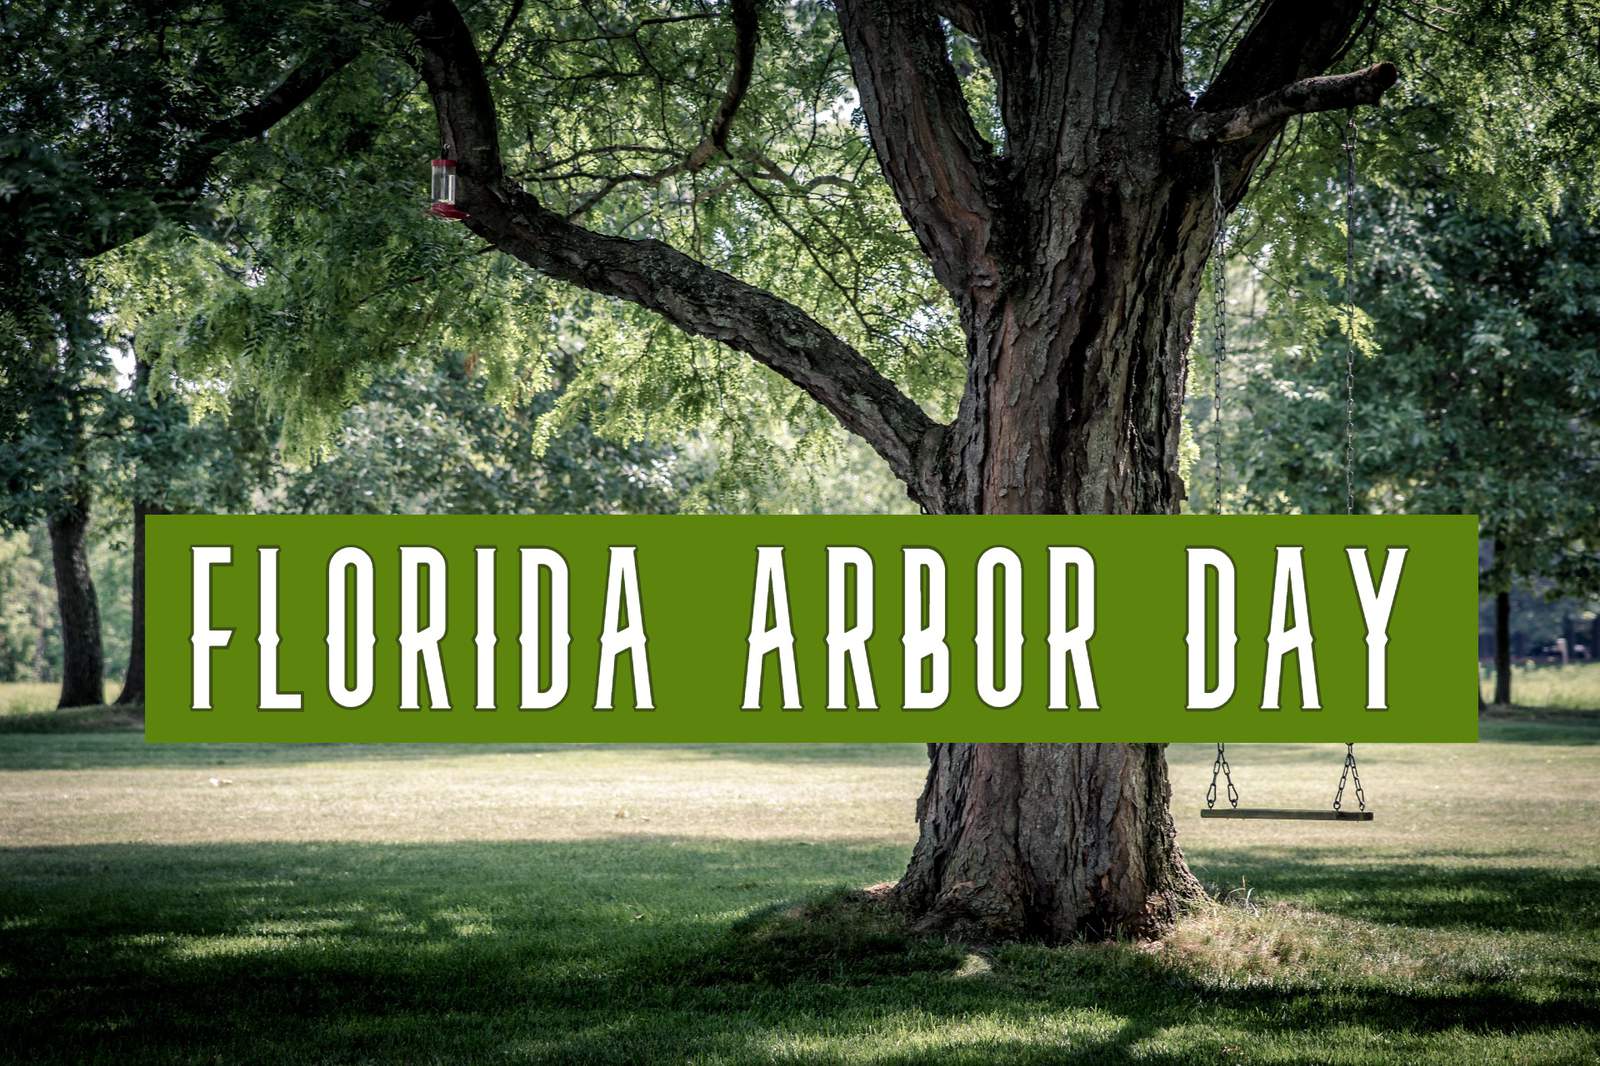 Free tree for Florida Arbor Day